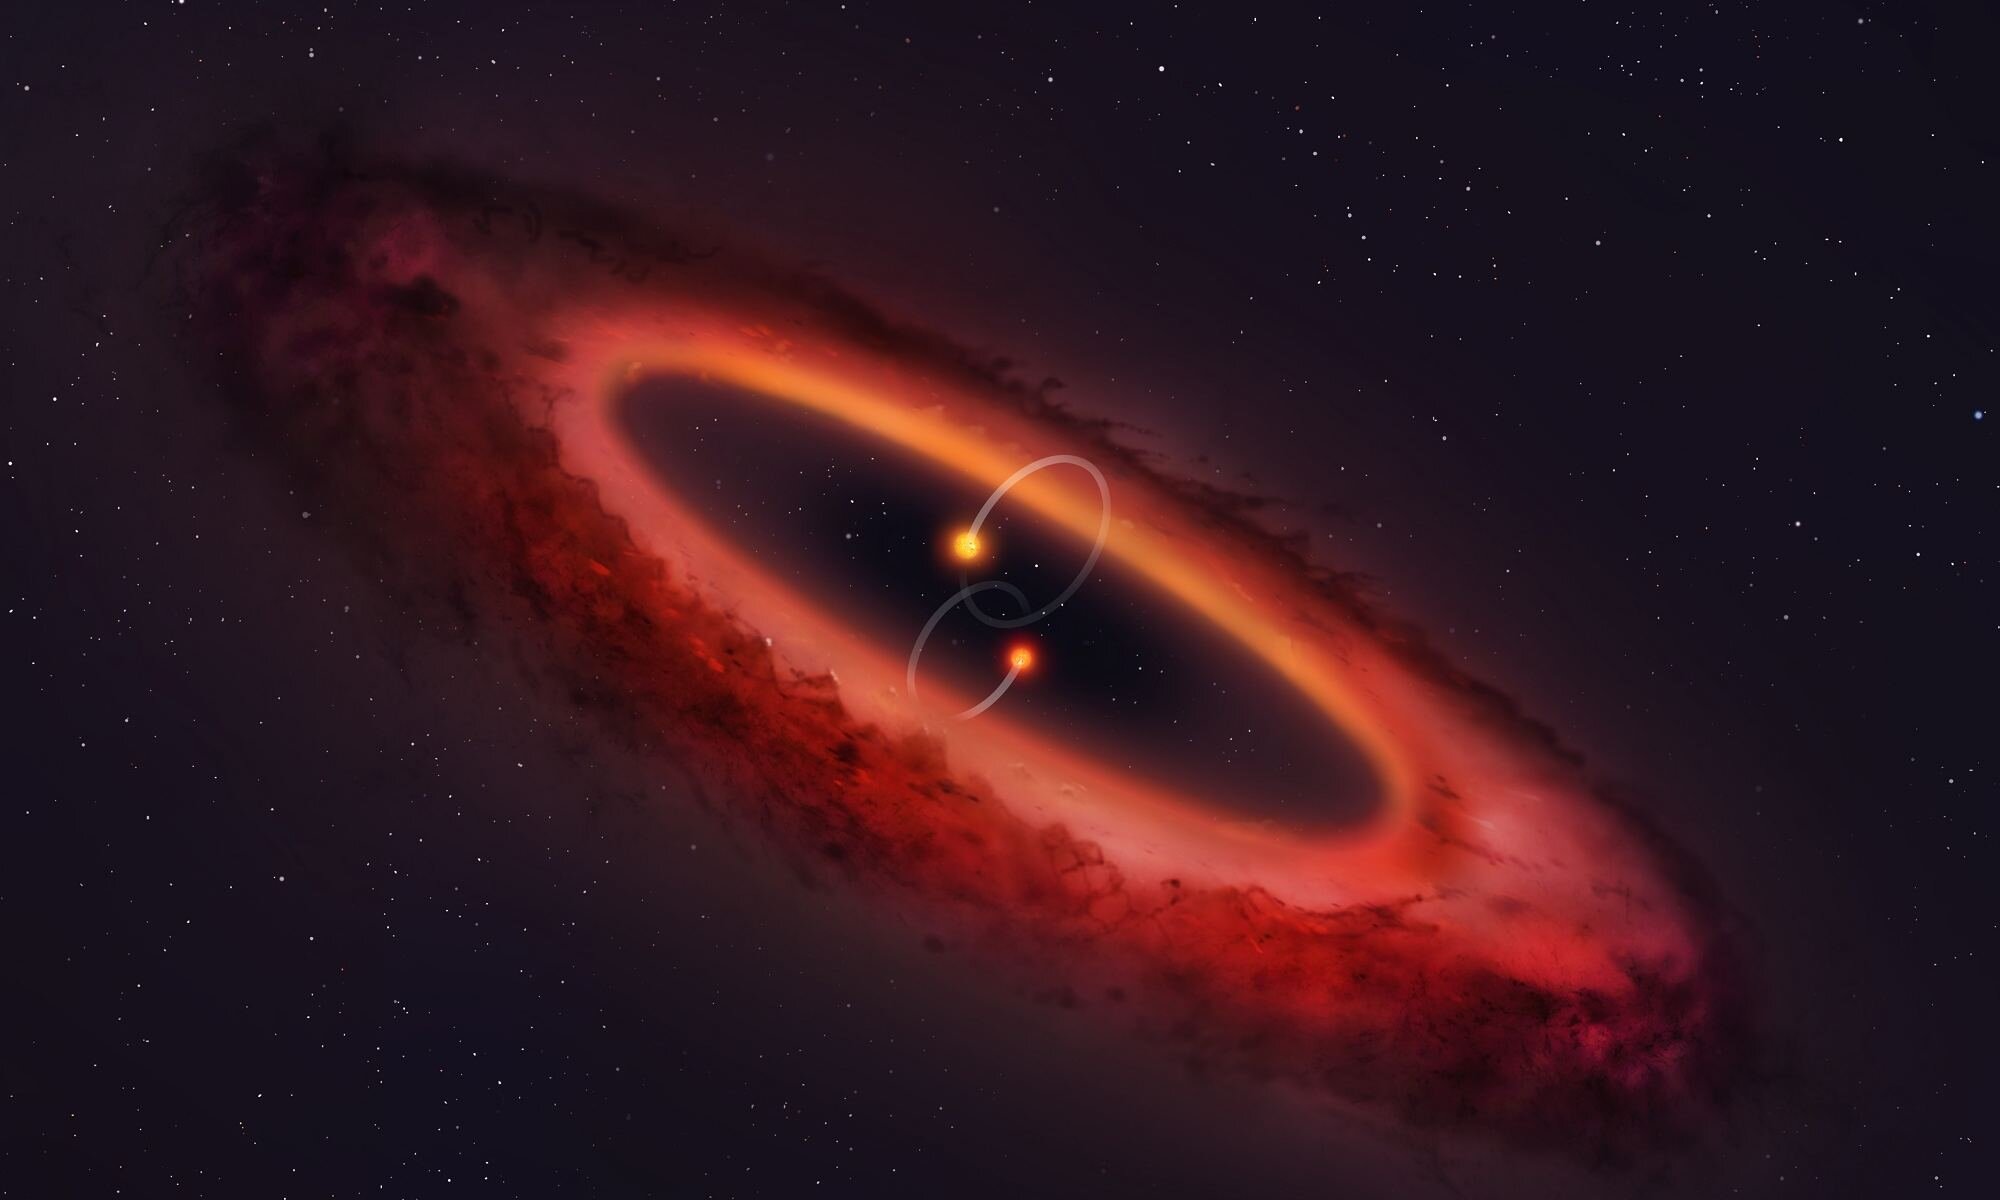 A planet with an amazing orbit around two stars is found